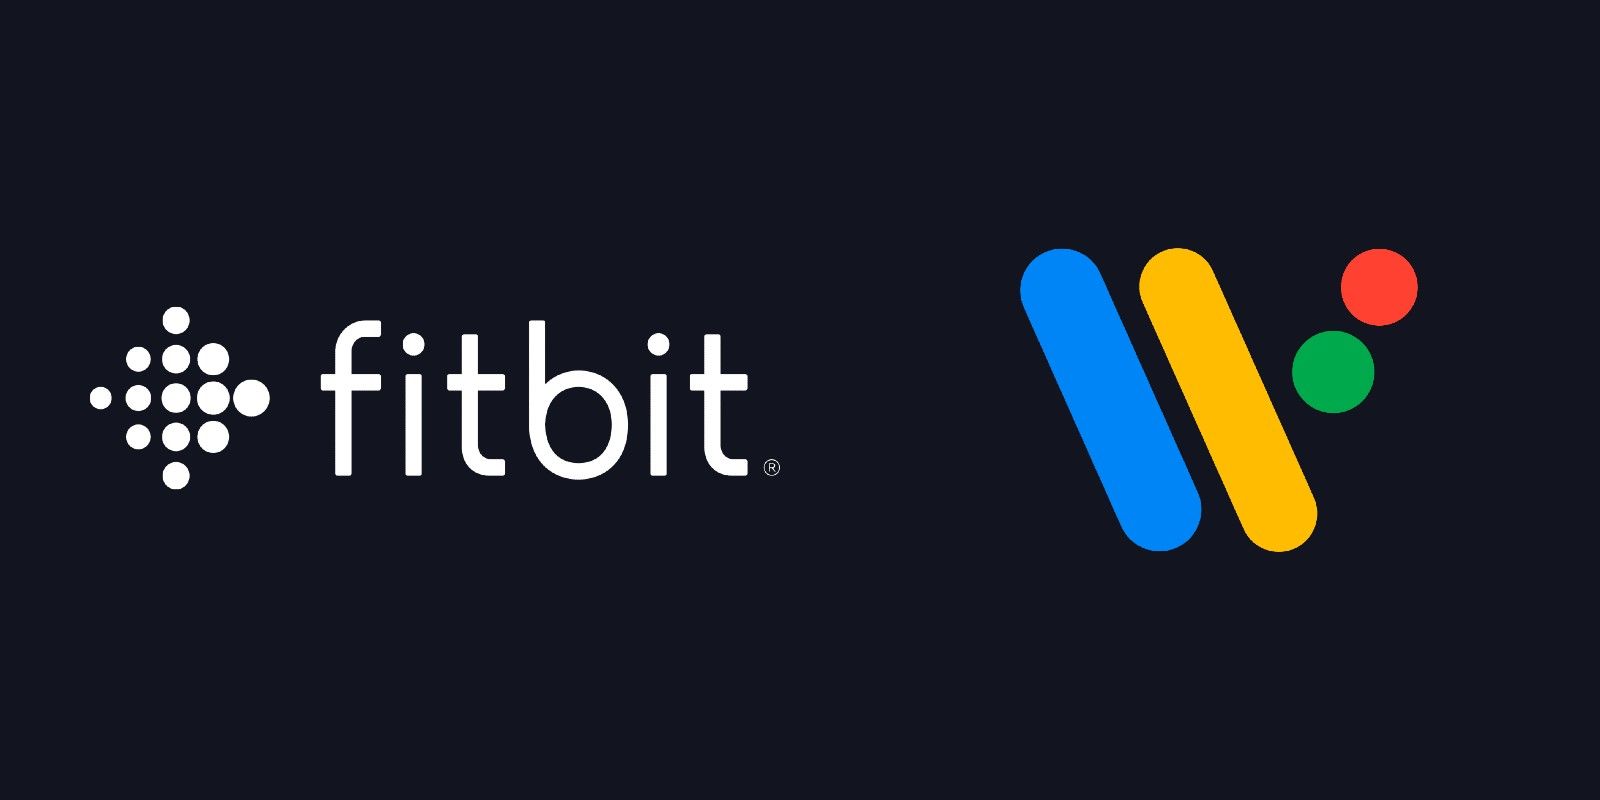 A photo showing the logos for Fitbit and Wear OS on a black background